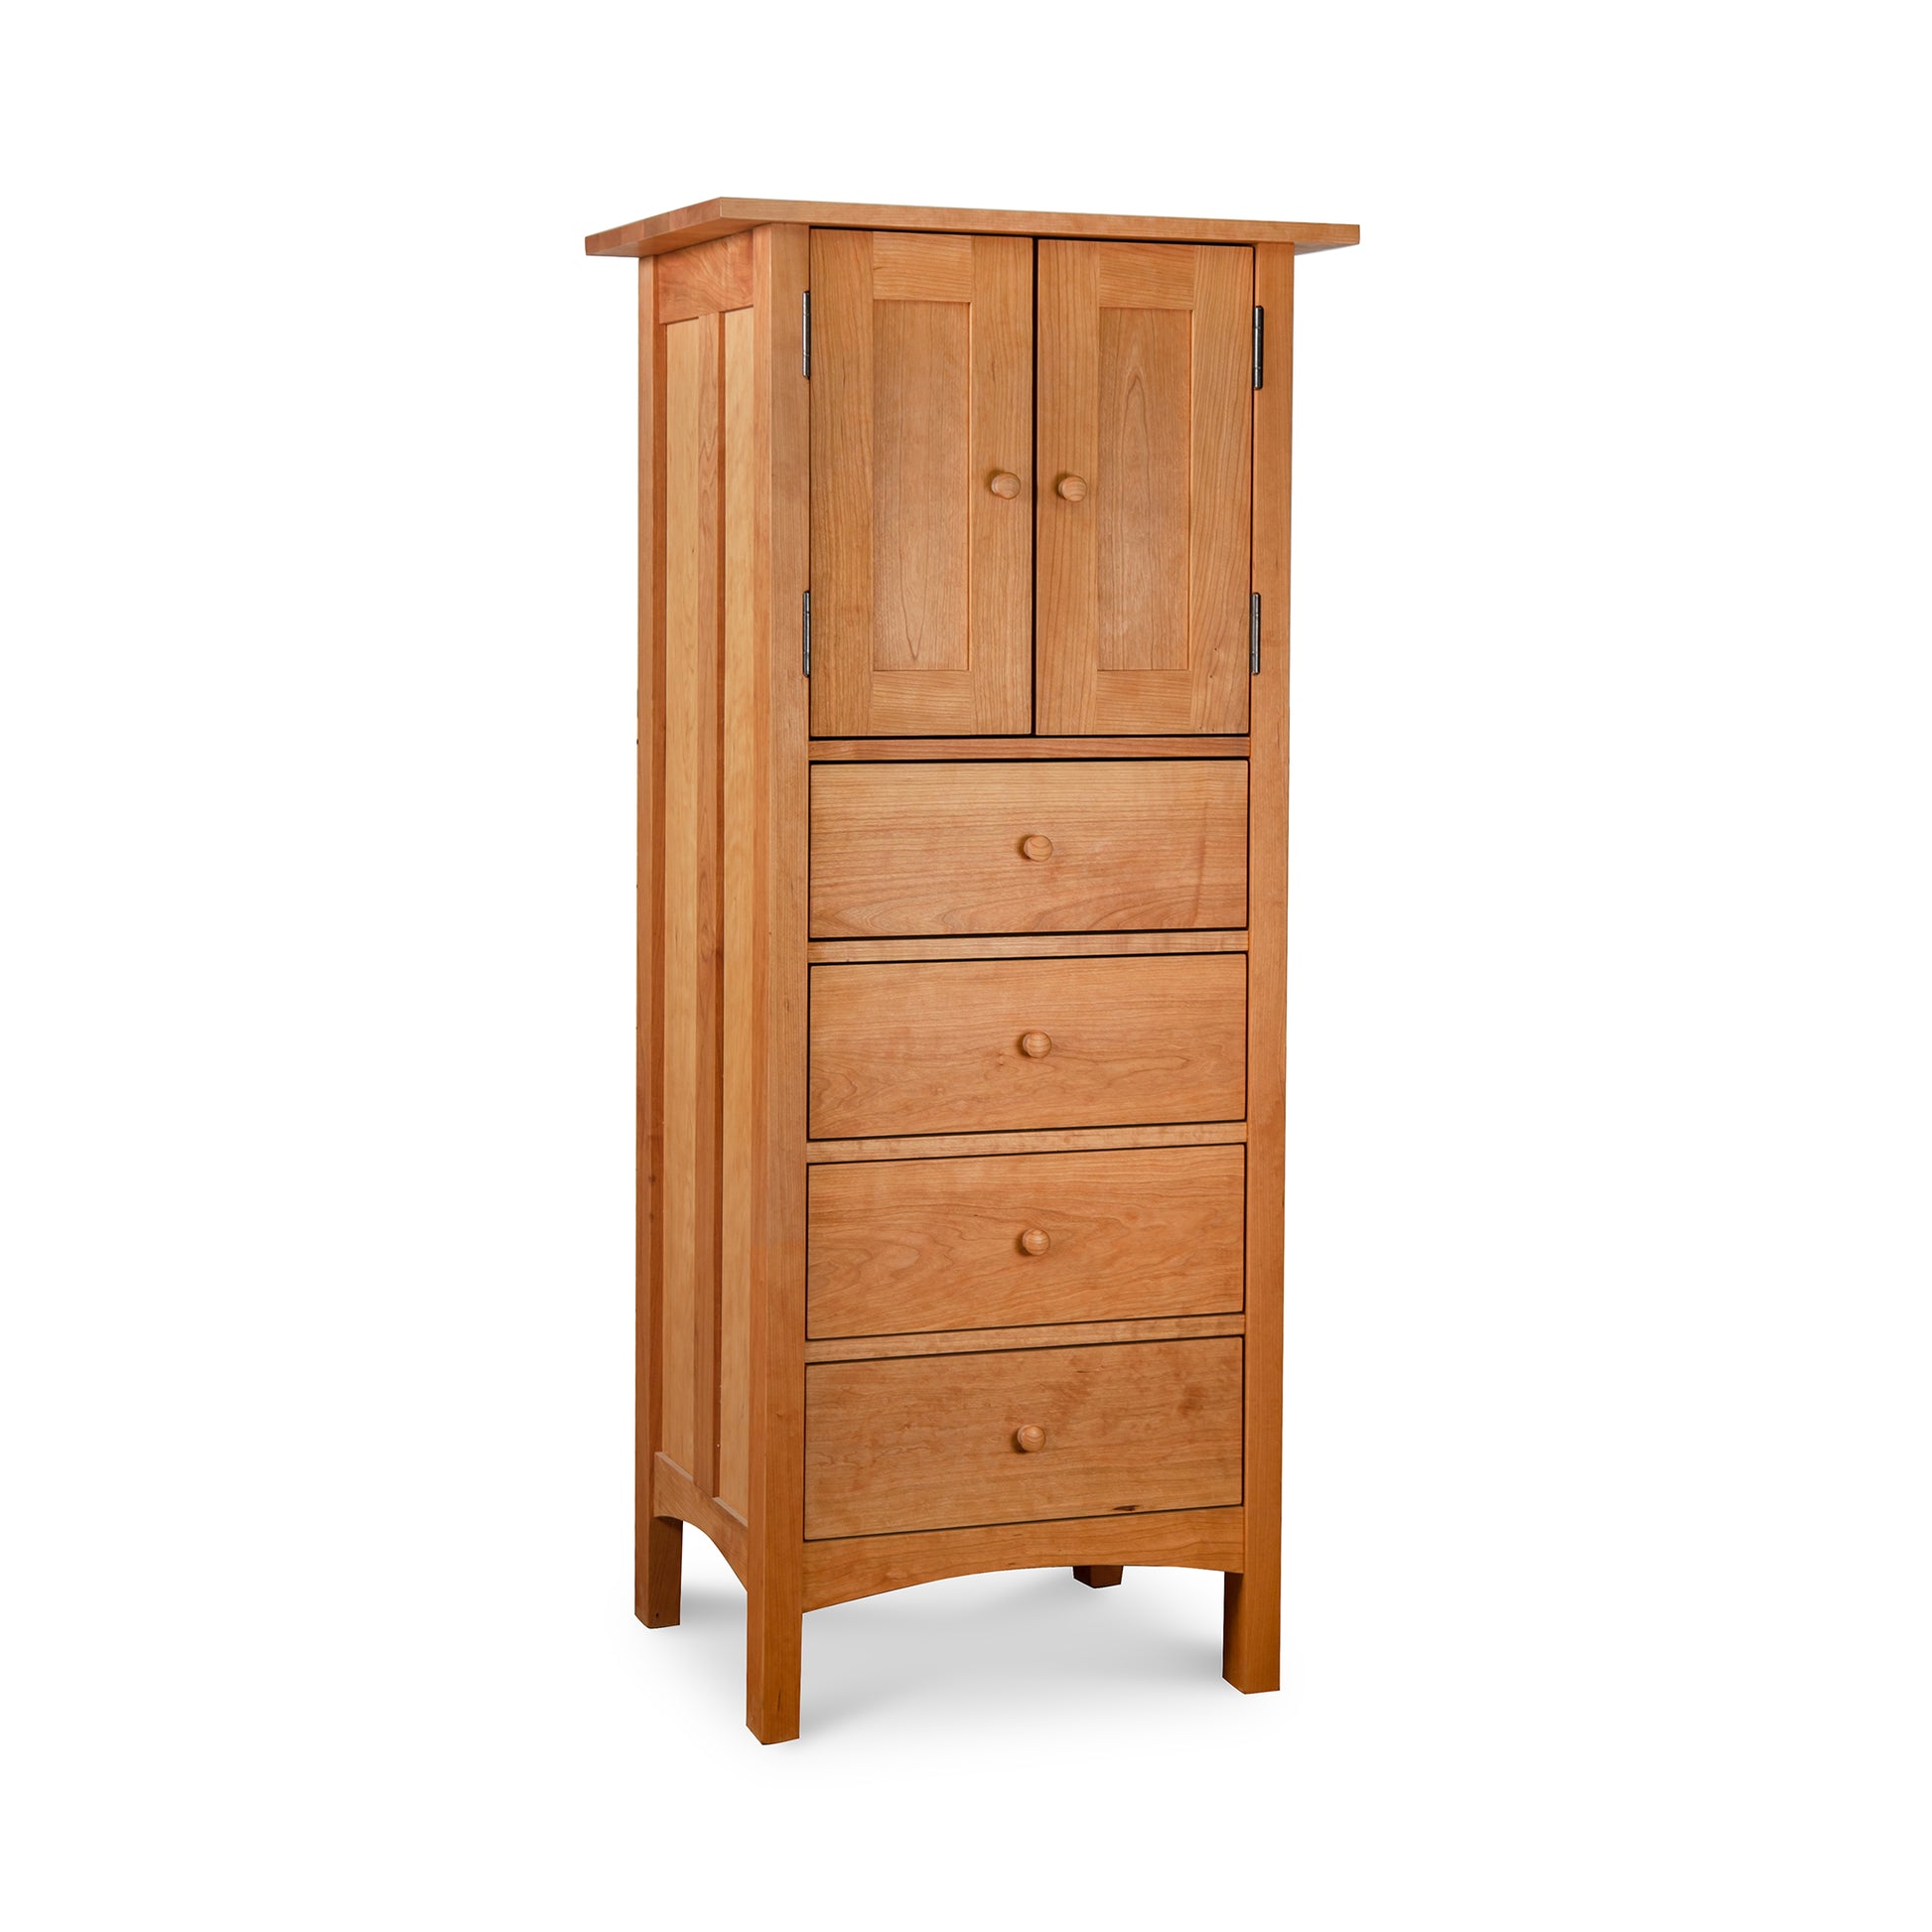 A Burlington Shaker Tall Storage Chest, designed in Vermont Furniture Designs' Shaker Style, is a tall solid wood cabinet with drawers on top.